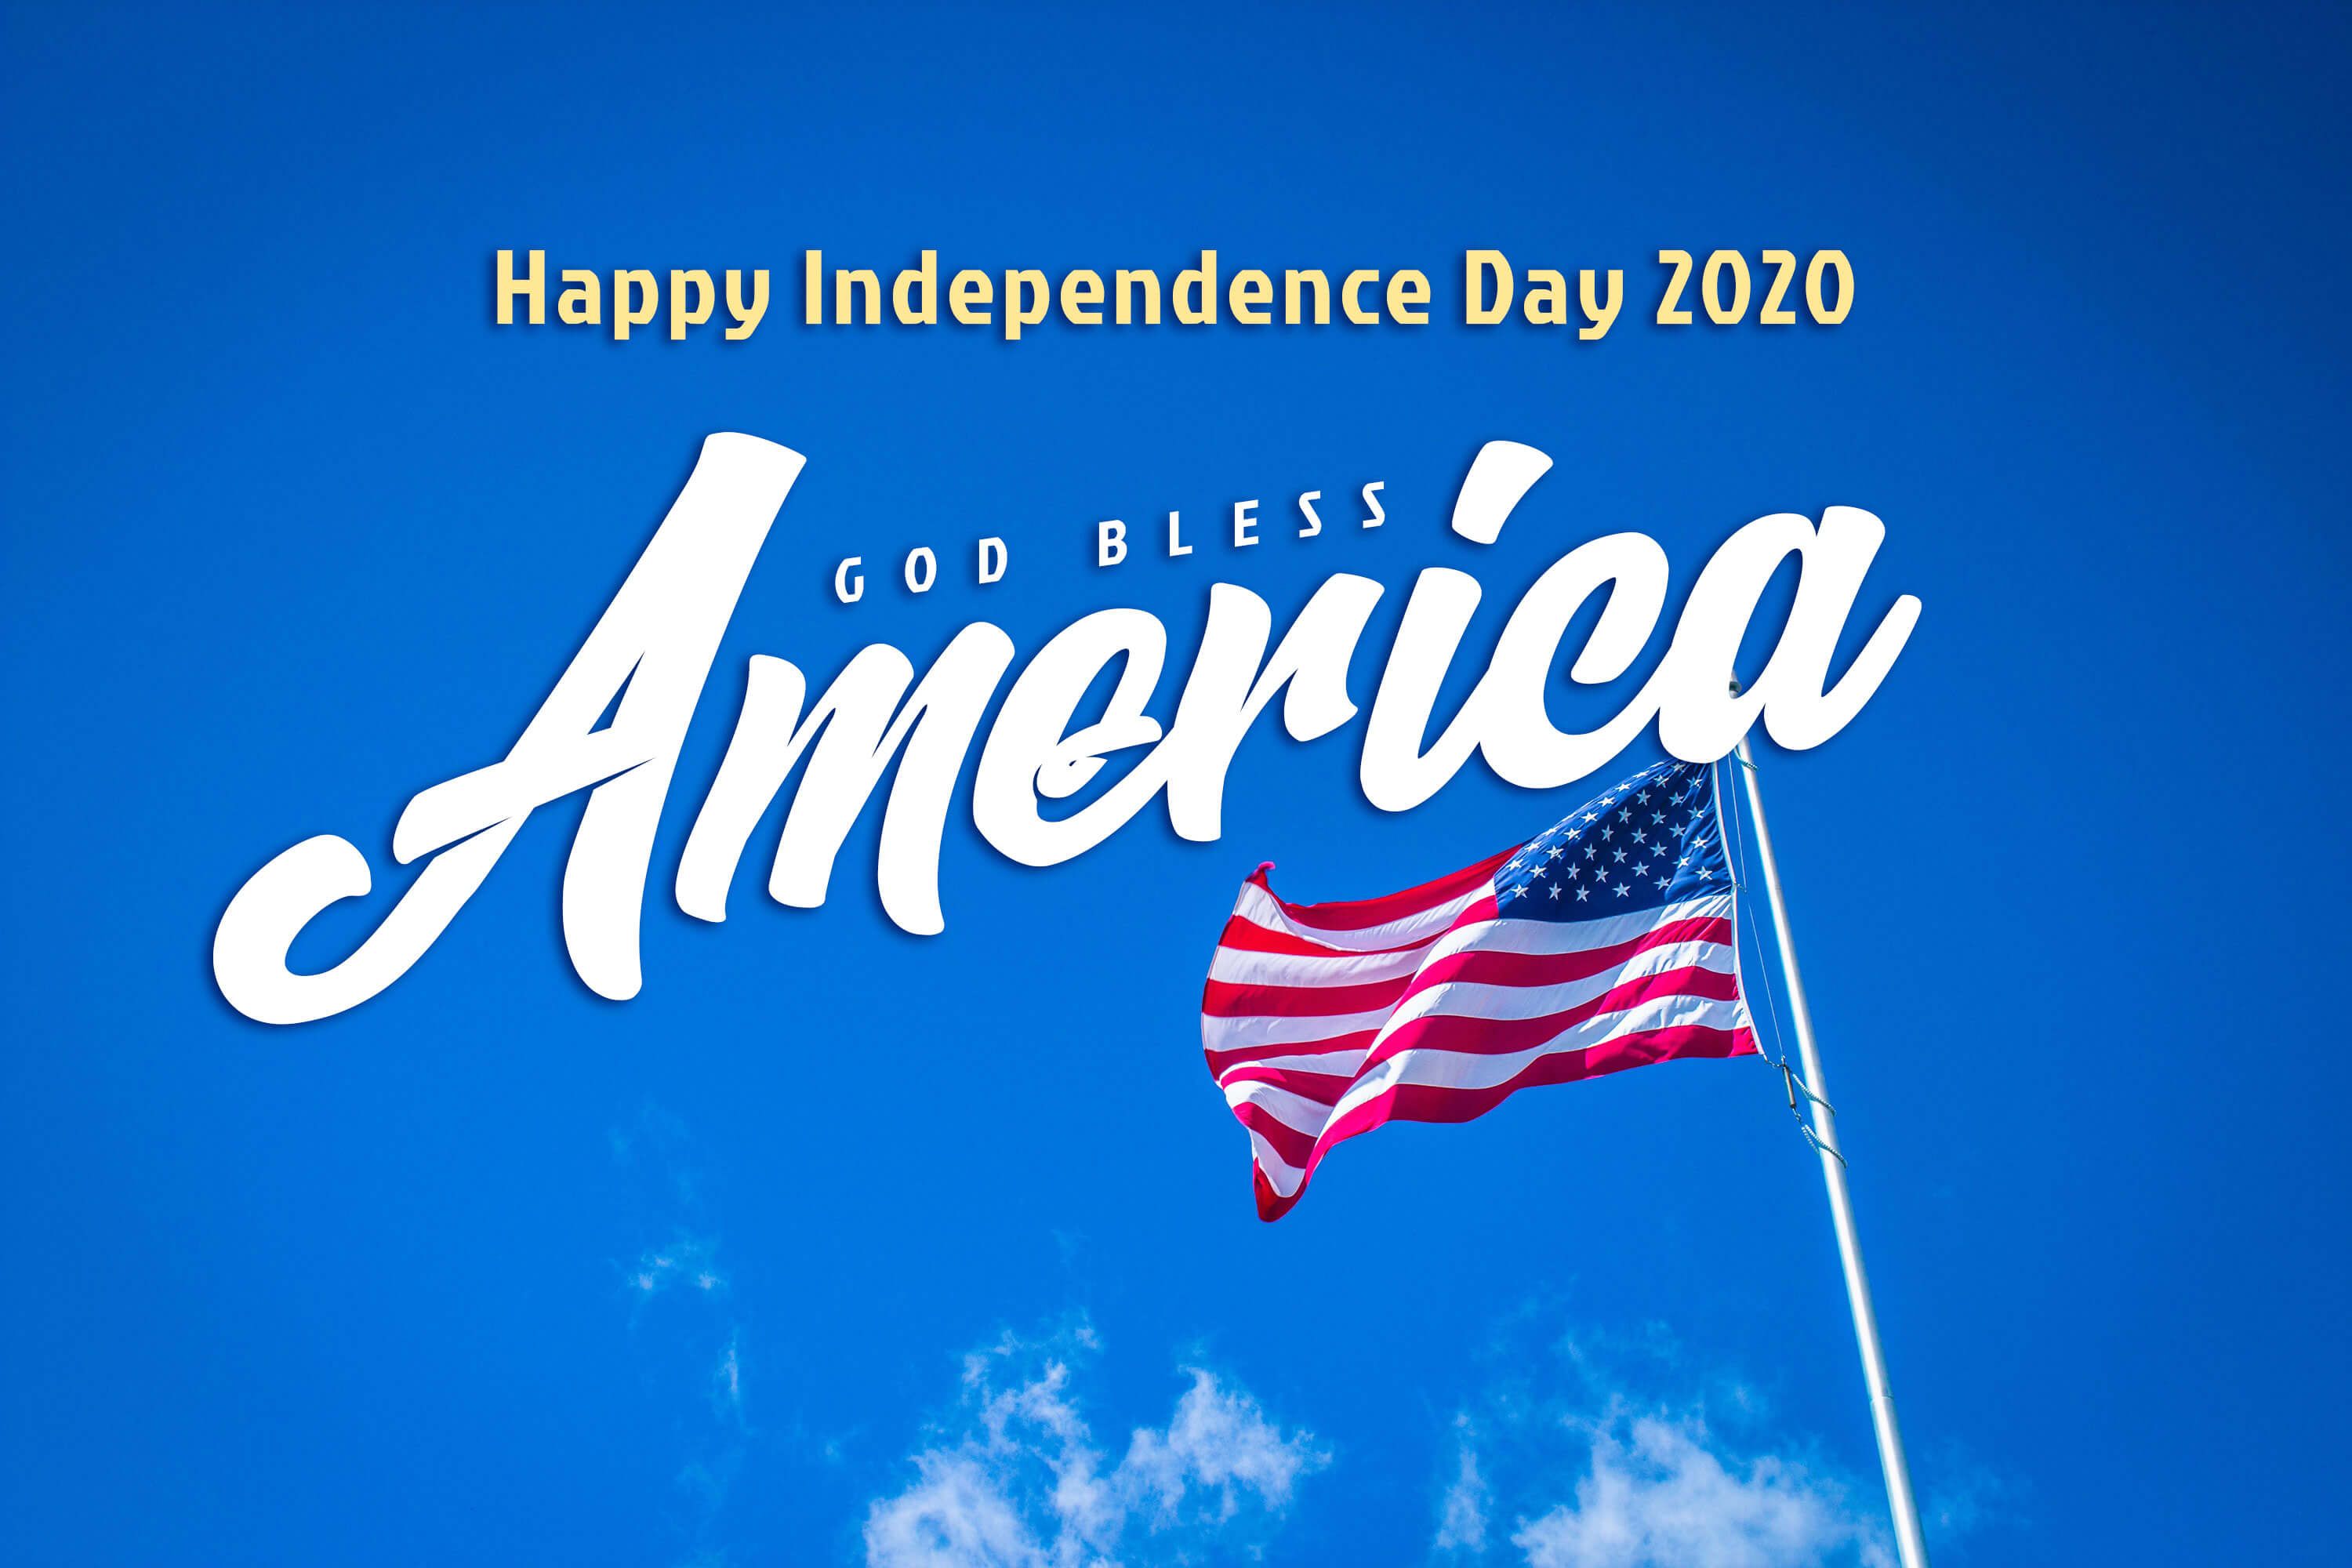 Happy 4th of July Independence Day USA 2020 Image & Wallpaper to Share